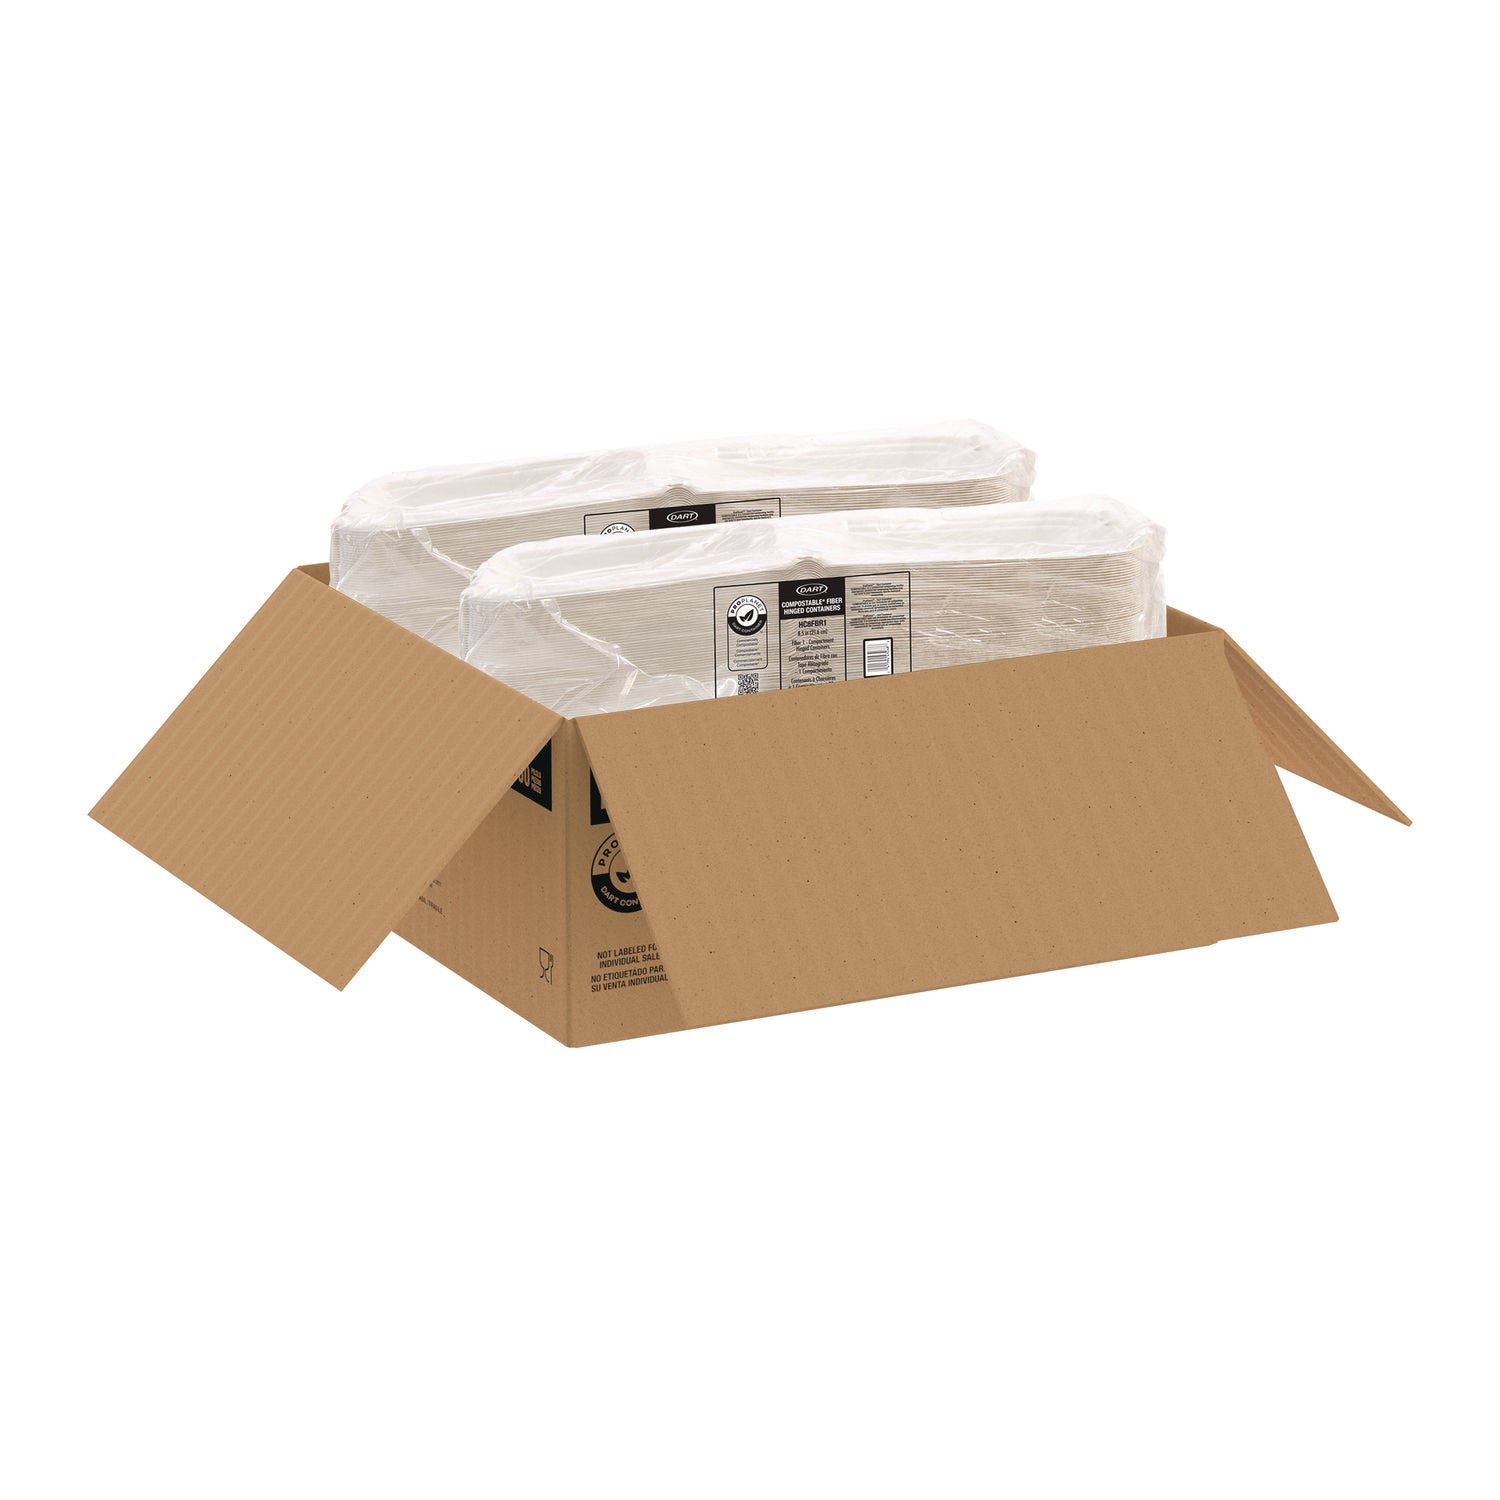 compostable-fiber-hinged-trays-proplanet-seal-803-x-838-x-193-ivory-molded-fiber-200-carton_dcchc8fbr1 - 4